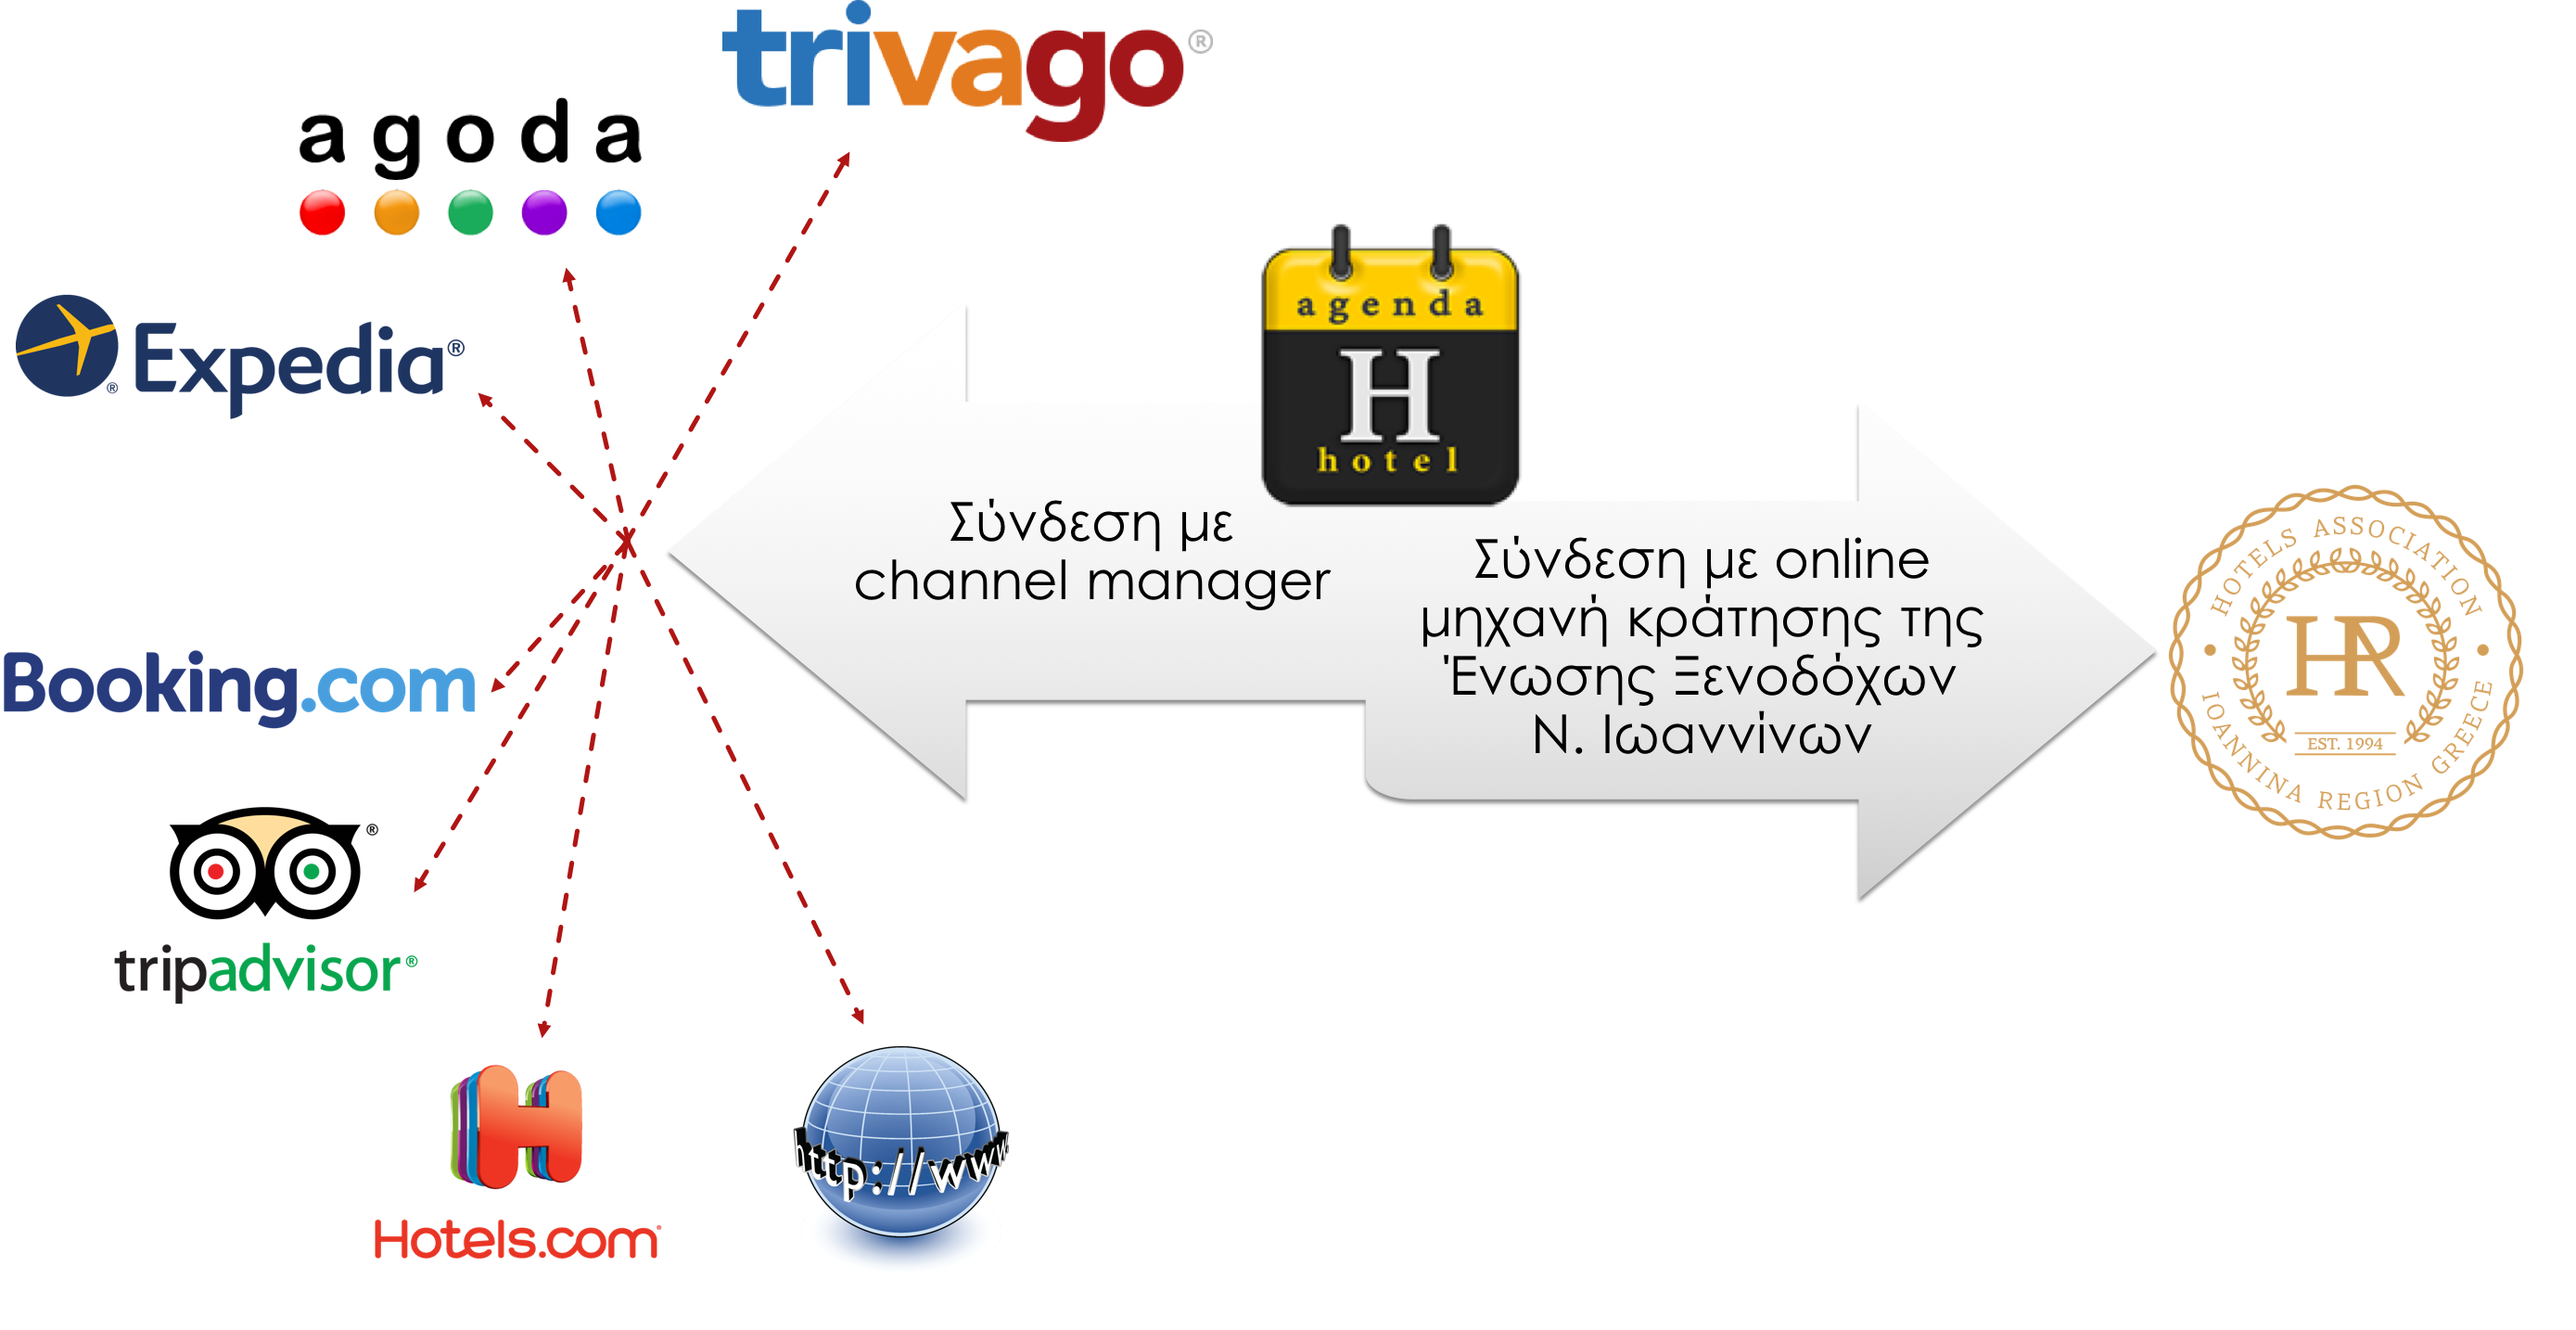 channel manager